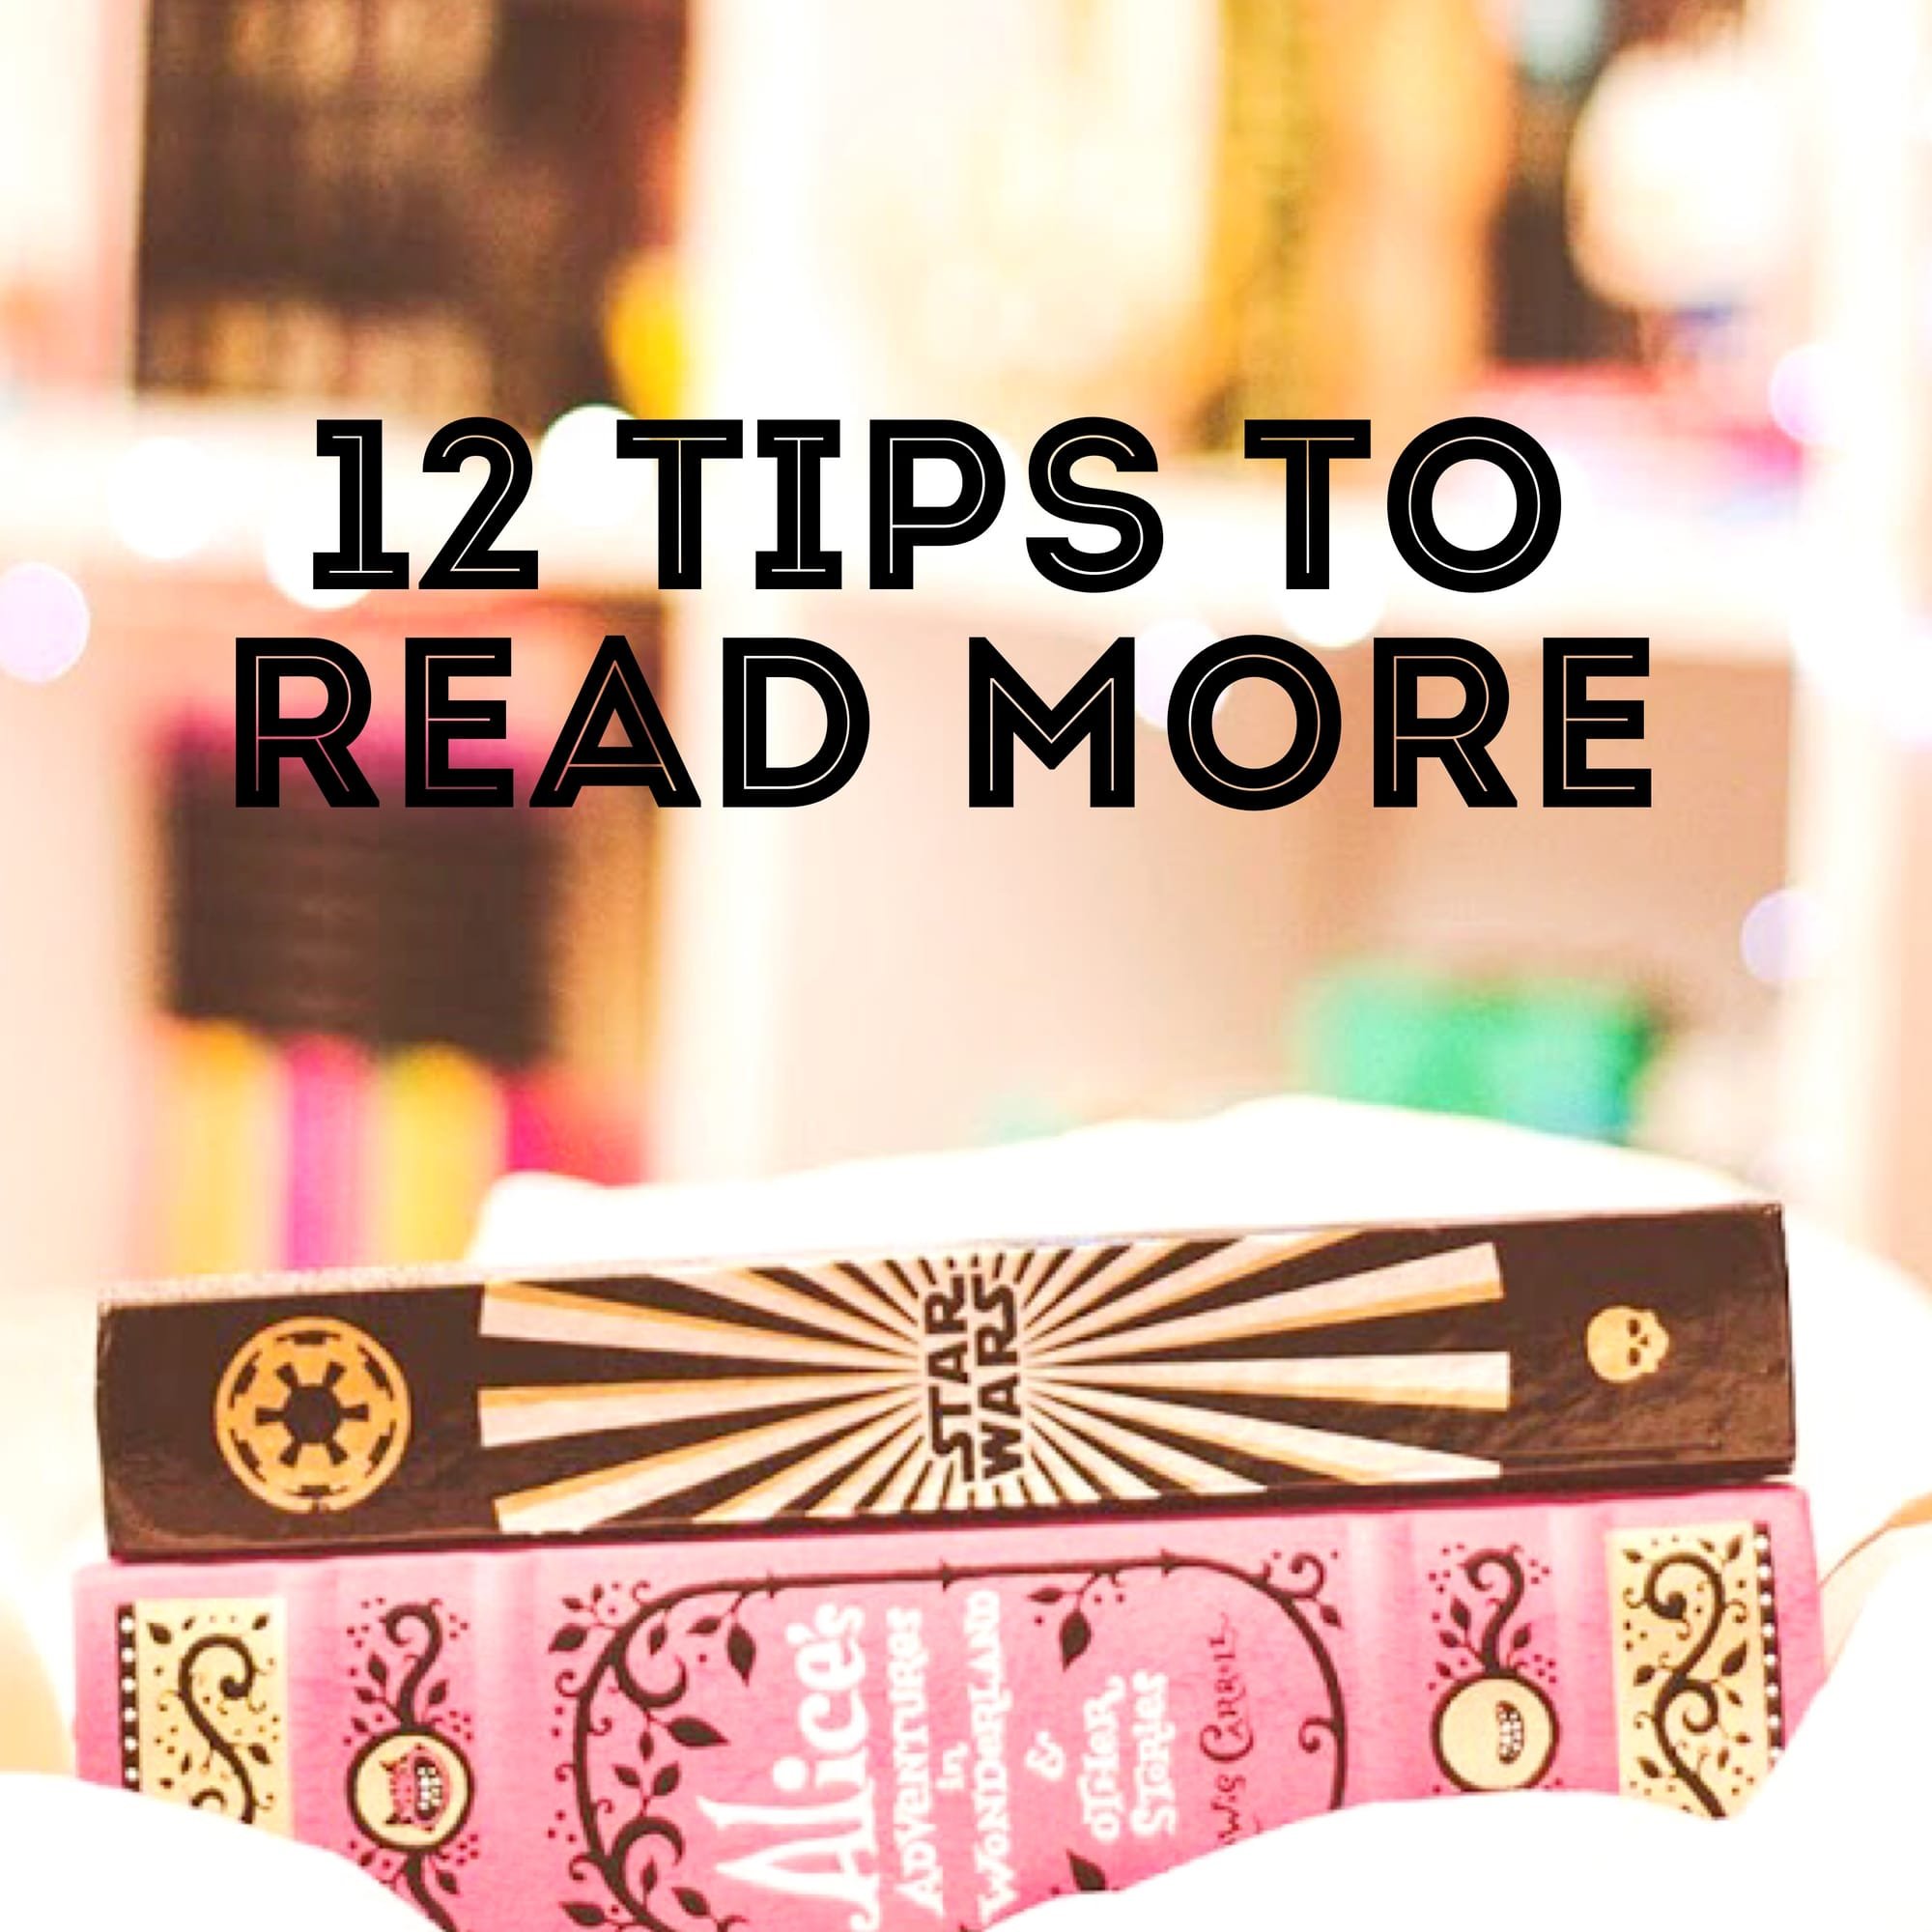 12 Tips to Read More